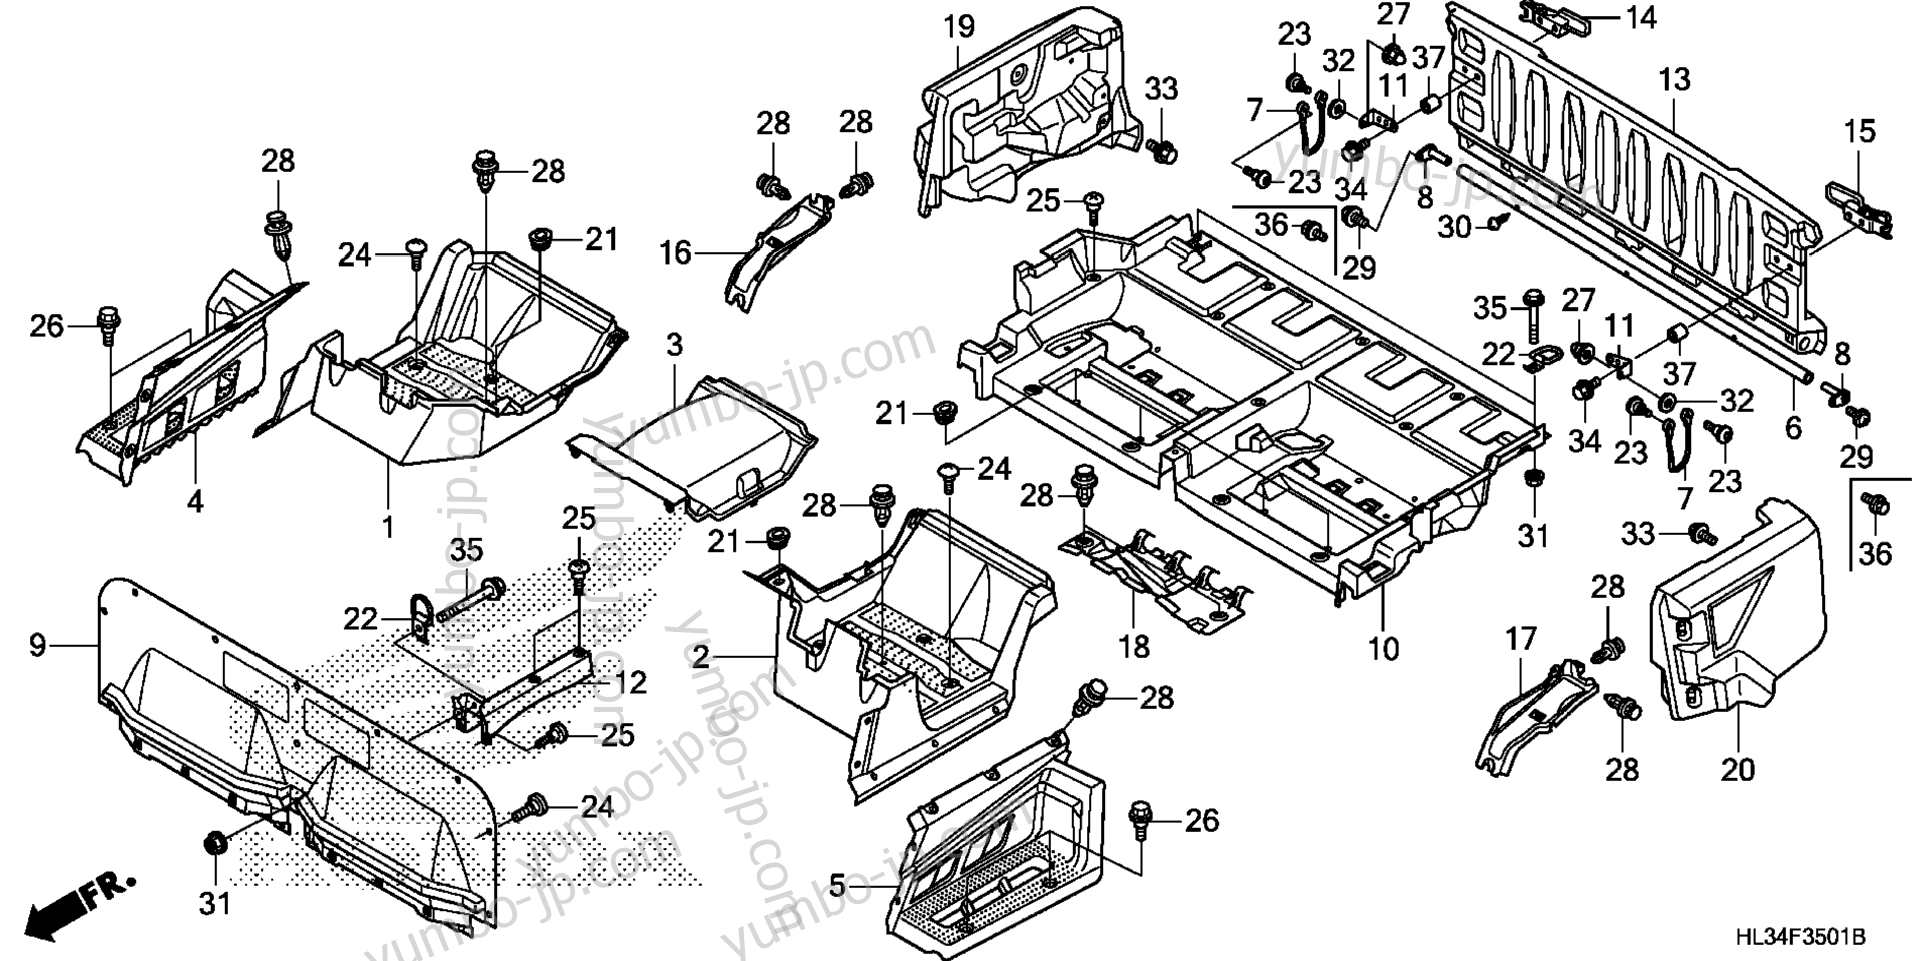 BED PLATE / REAR GATE (2) for UTVs HONDA Pioneer 700-4 (SXS700M4 3AC) 2014 year